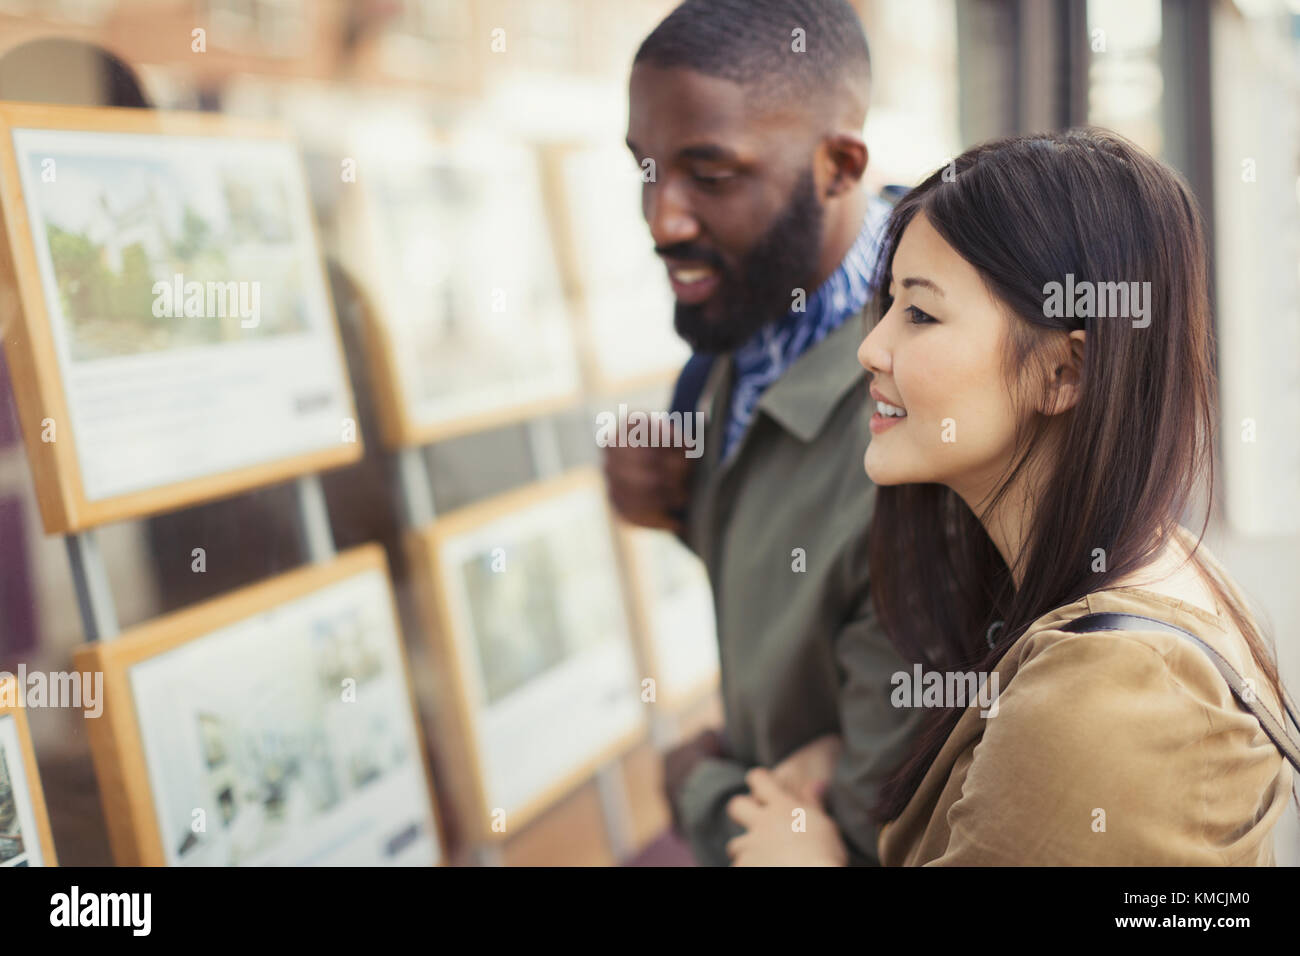 Smiling young couple looking at real estate listings at storefront Stock Photo